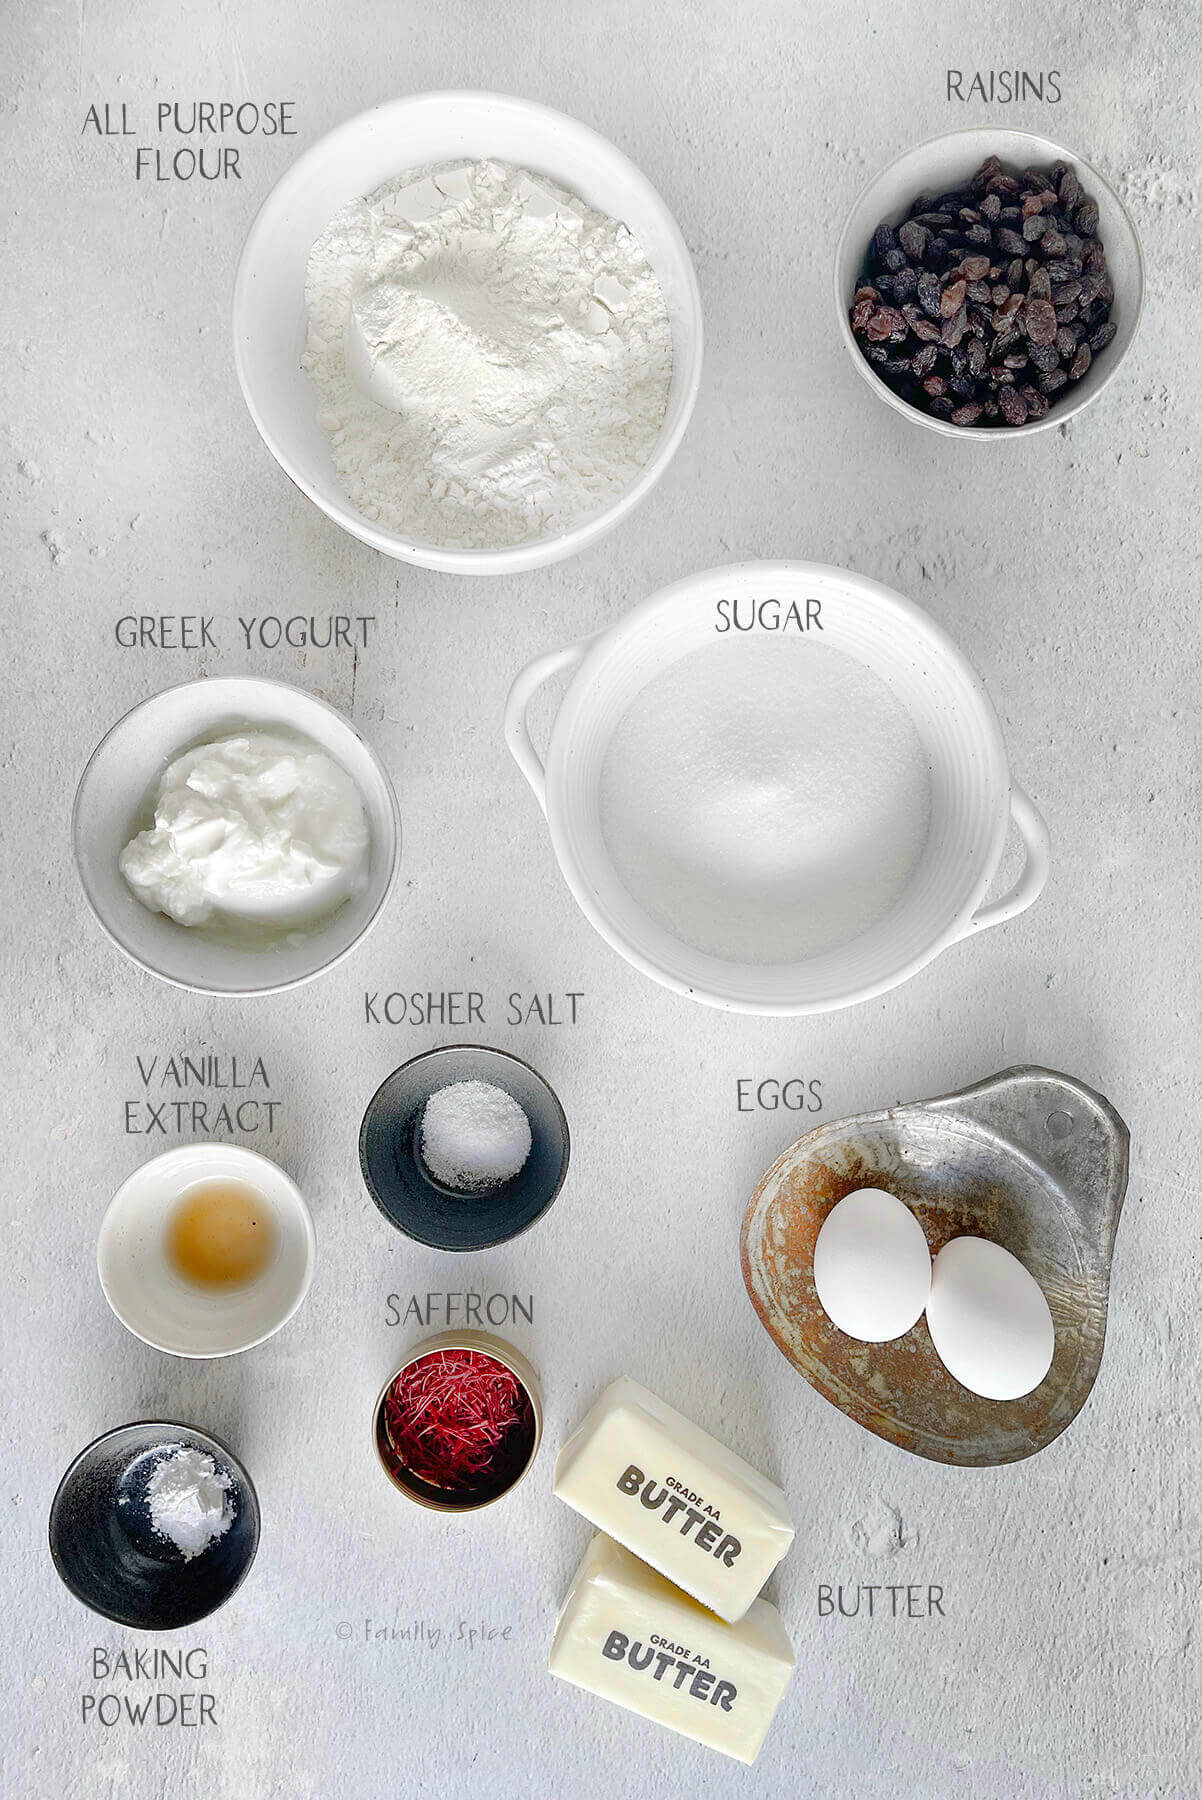 Ingredients labeled and needed to make saffron cake with raisins